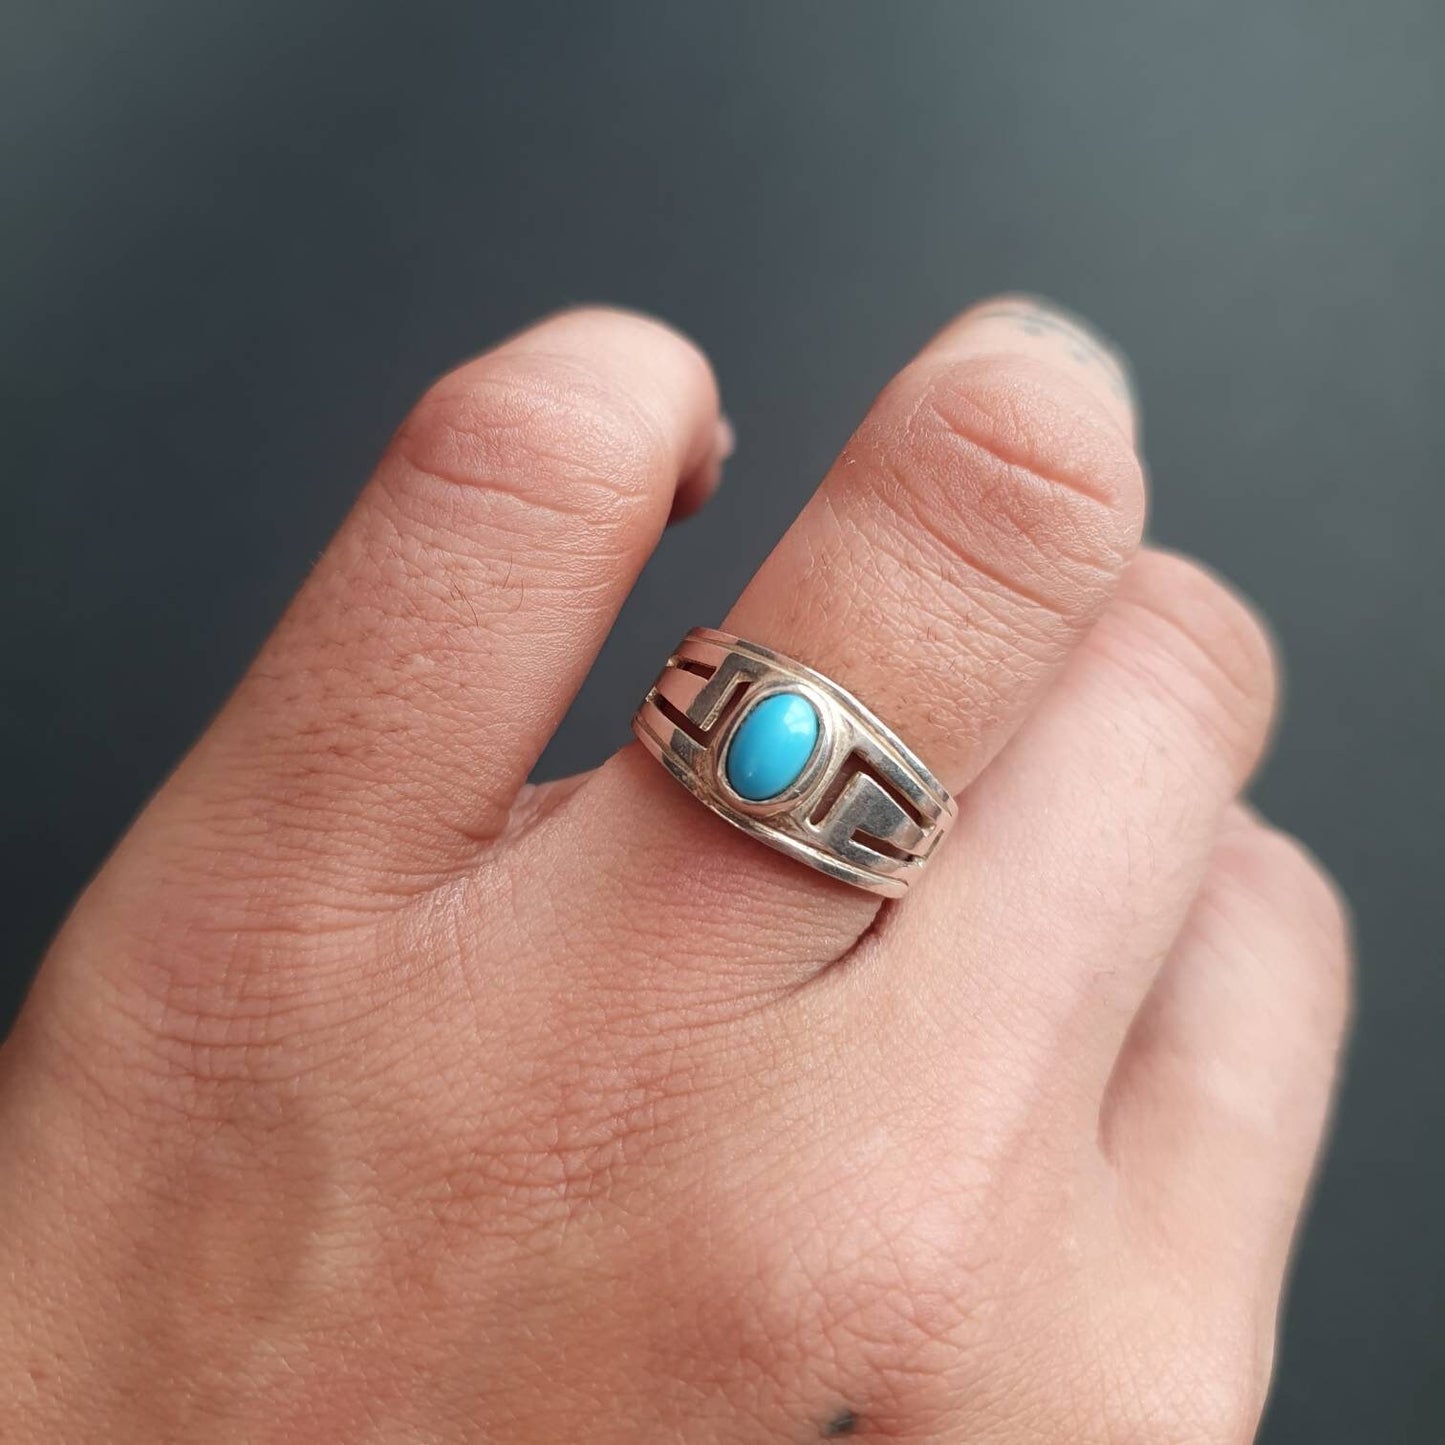 Band Ring, Navajo Turquoise Gemstone Ring, Sterling Silver Statement Ring Sleeping Beauty Dainty American Indian ring Greek Design Ring